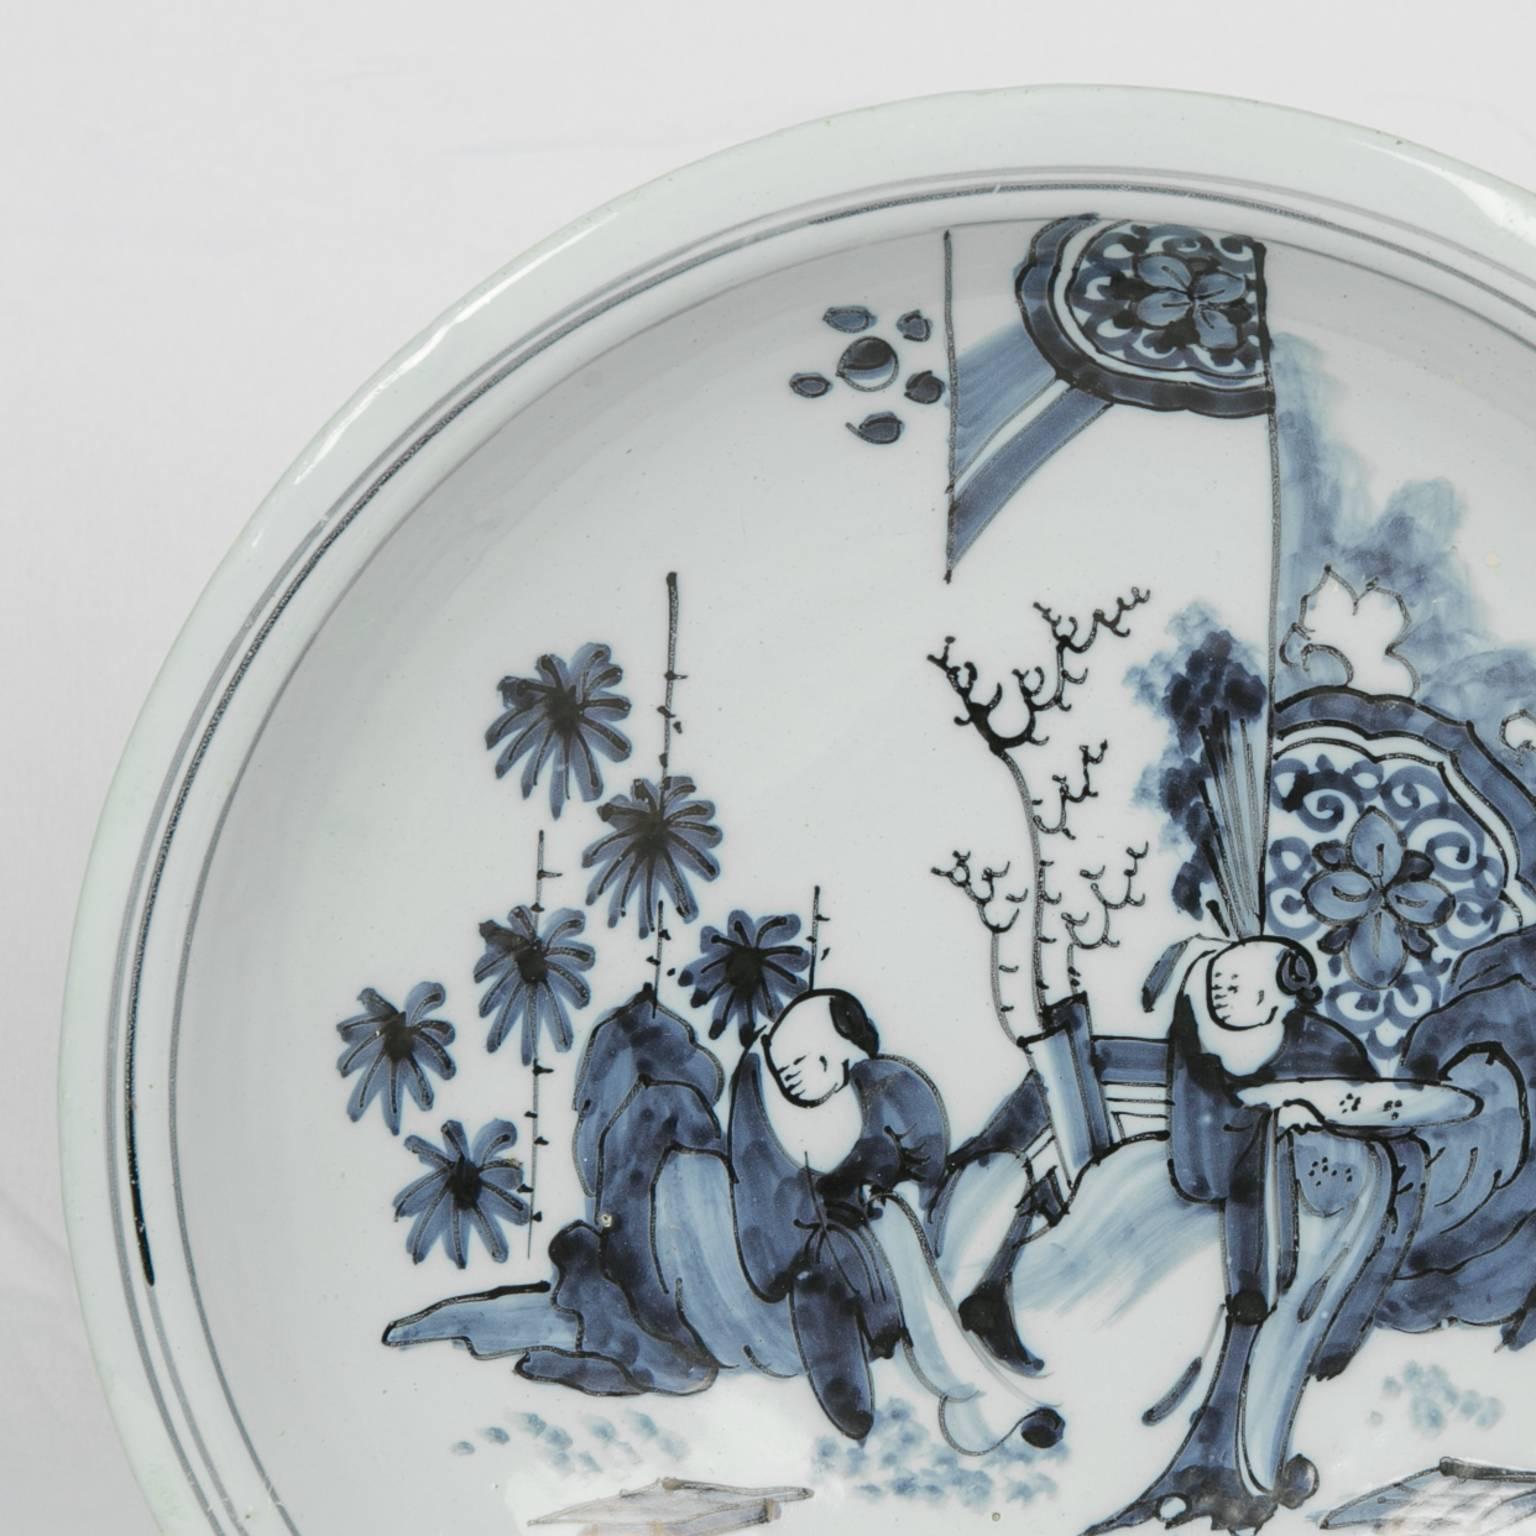 Blue and White Delft Charger with Chinese Inspired Scene Made circa 1640-1650 (Chinoiserie)